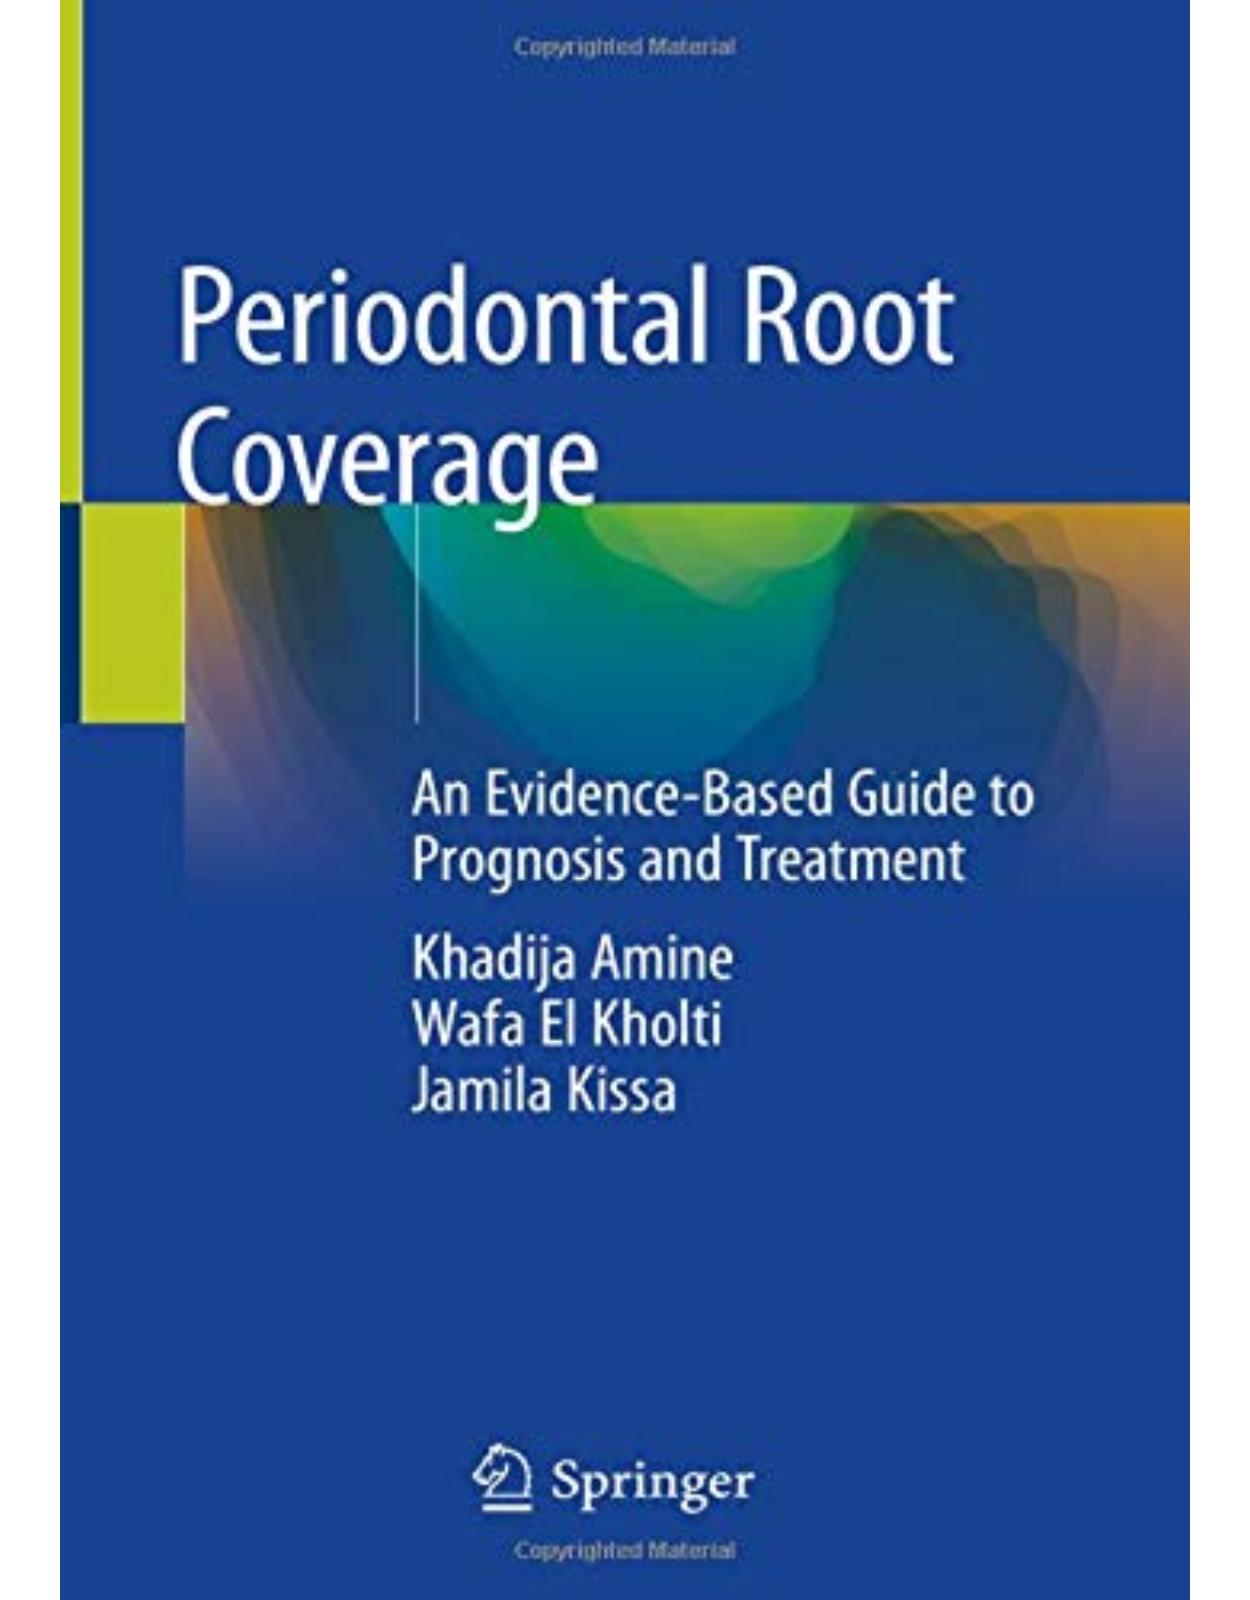 Periodontal Root Coverage. An Evidence-Based Guide to Prognosis and Treatment